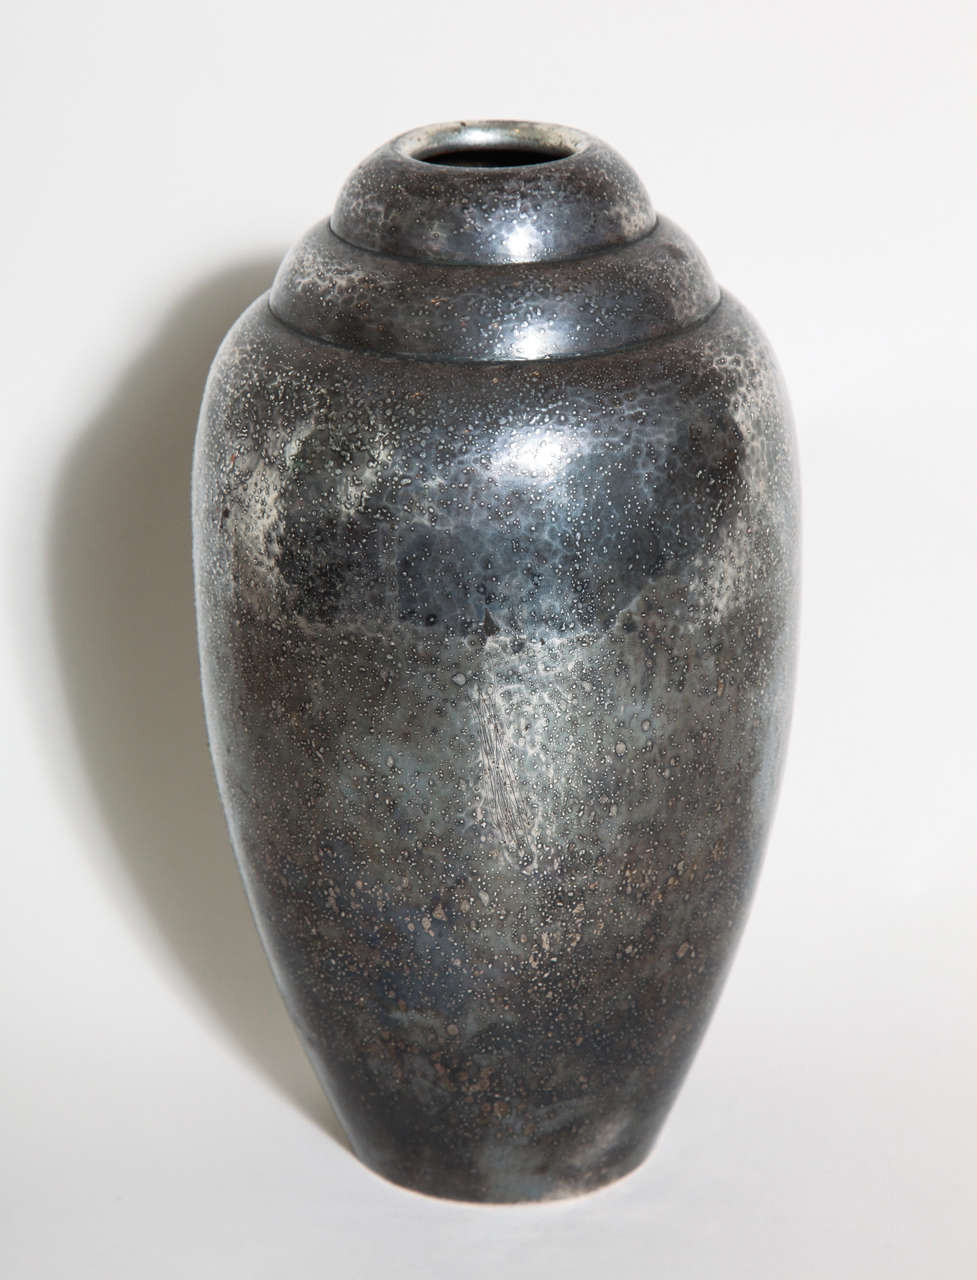 Ovoid maillechort and copper vase with double recessed arch neck and silver/black pebbled patina

Impressed Christofle/ B61D underneath.

(Price shown is reduced price, no further trade discount)